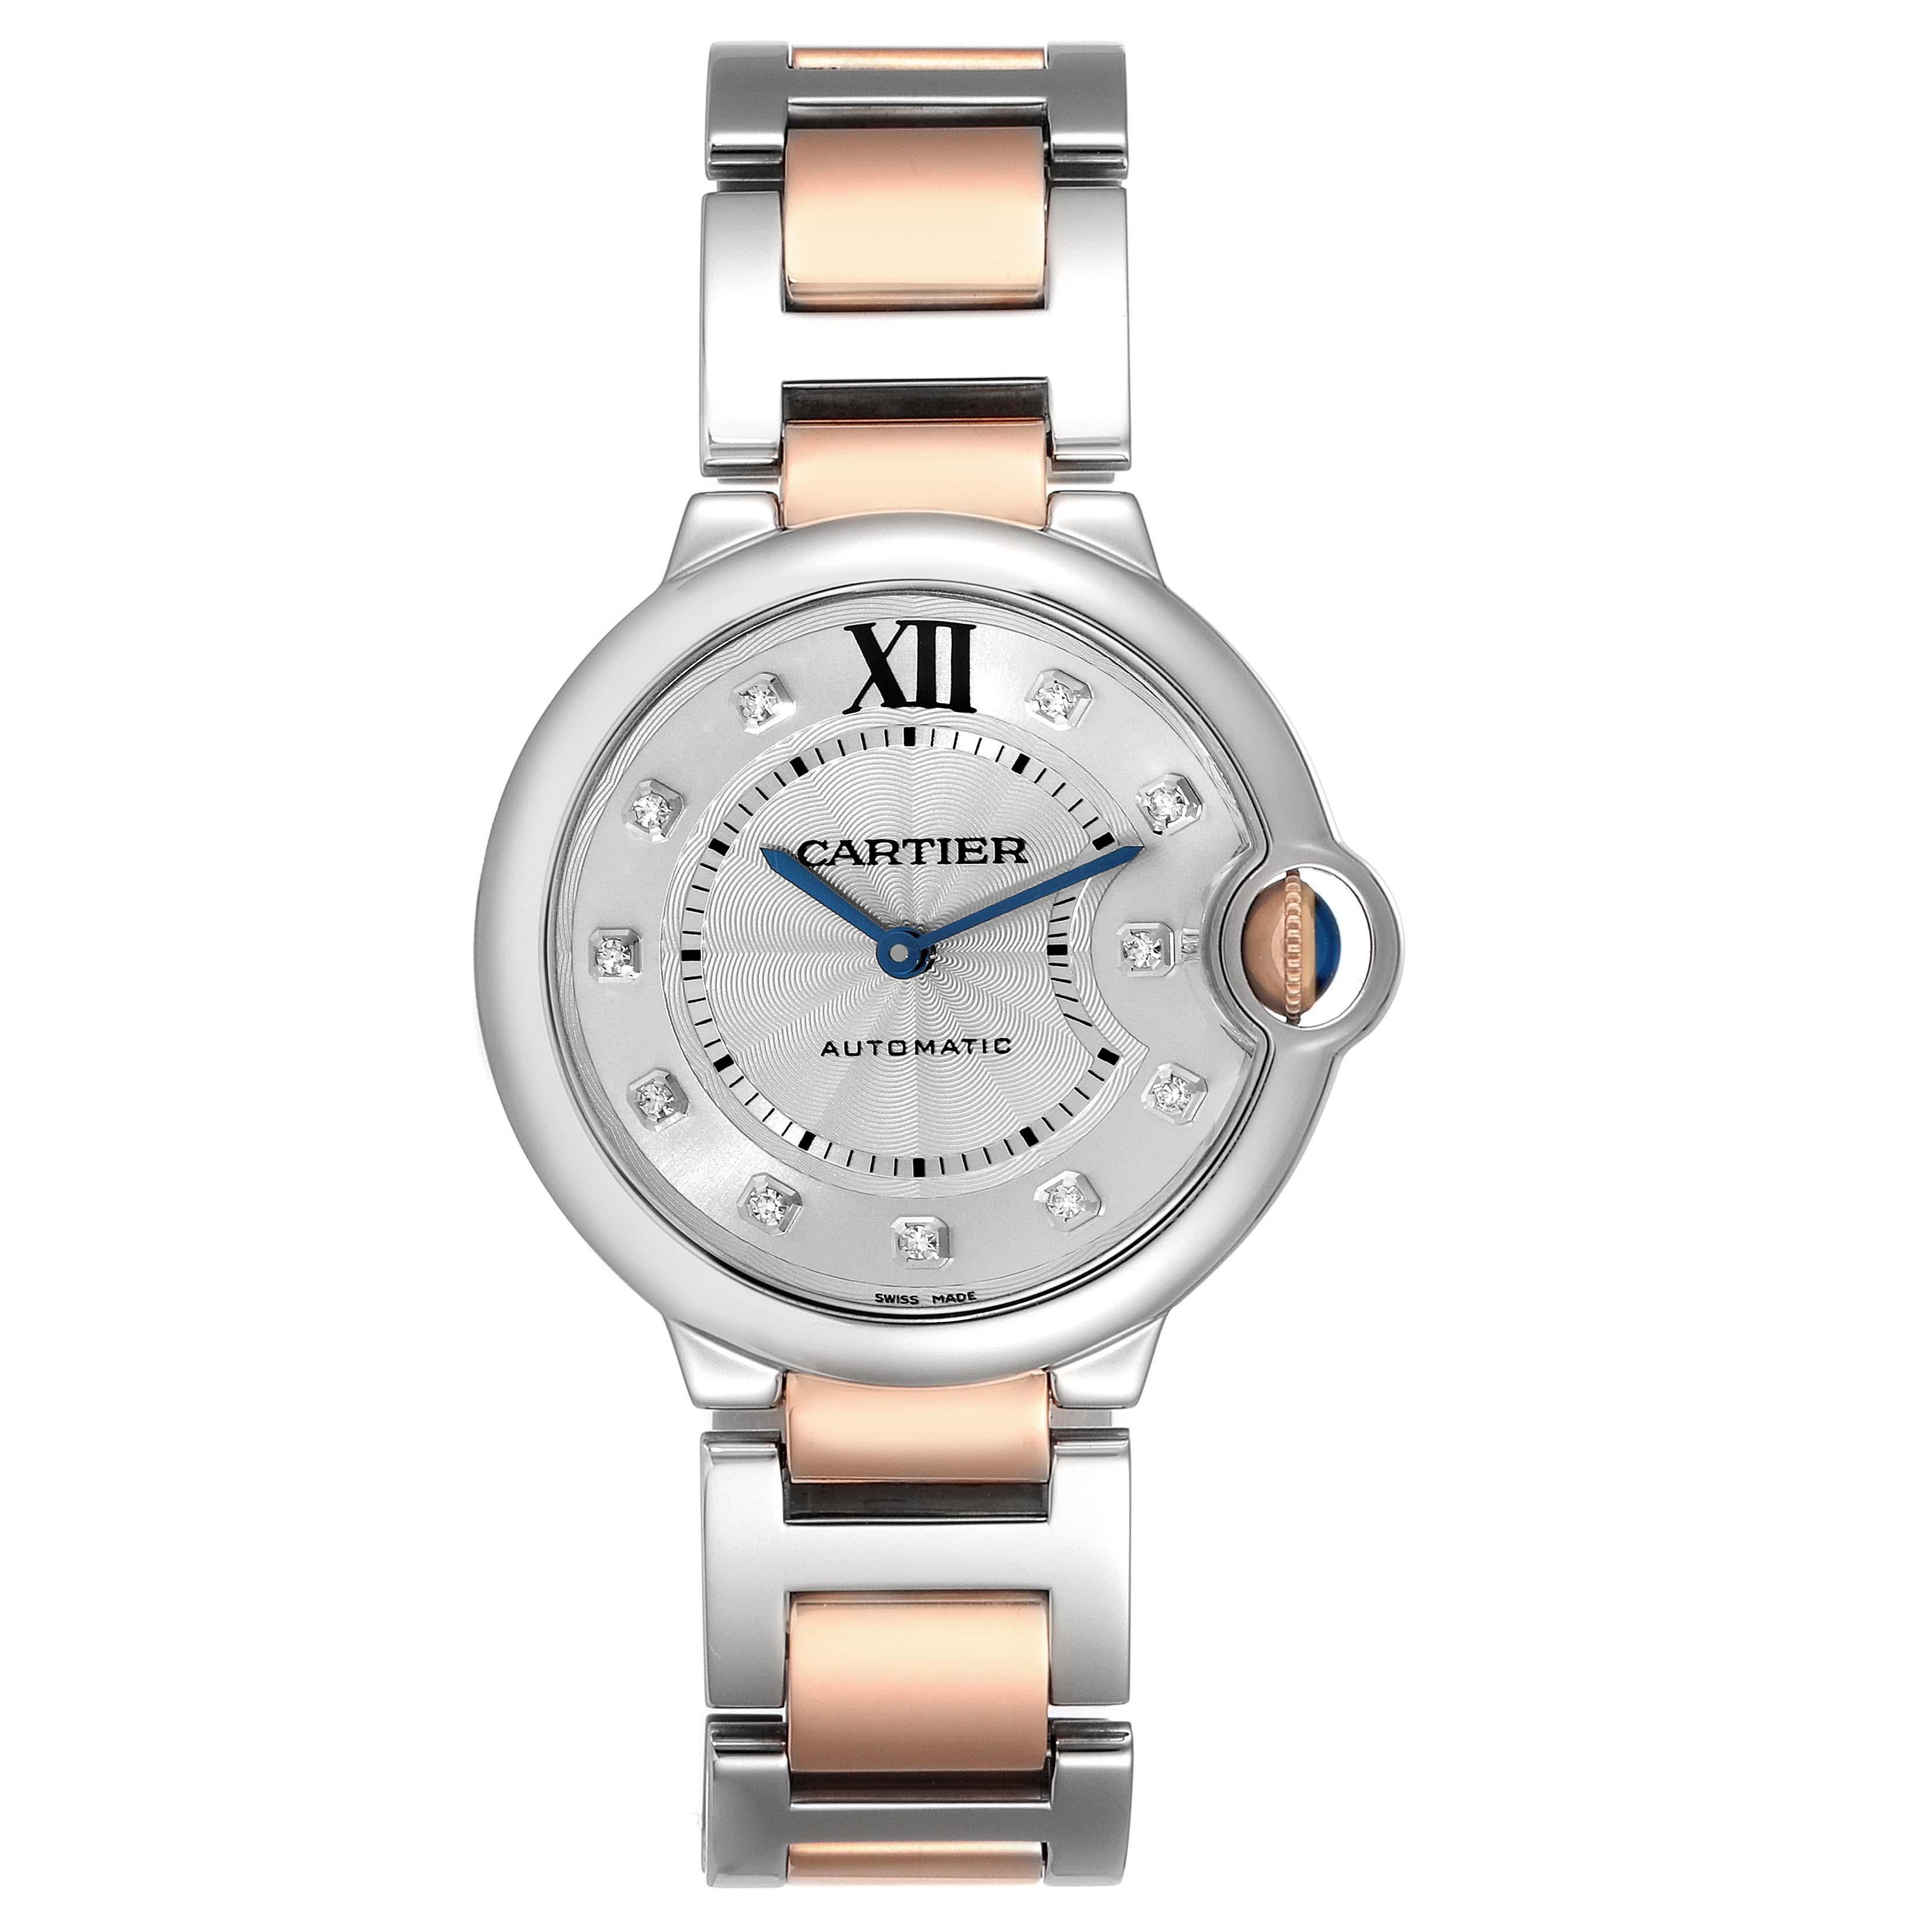 Cartier Ballon Bleu Midsize Steel Rose Gold Diamond Ladies Watch W3BB0018. Automatic self-winding movement. Stainless steel case 36 mm in diameter. 18k rose gold fluted crown set with a blue spinel cabochon. Stainless steel smooth bezel. Scratch